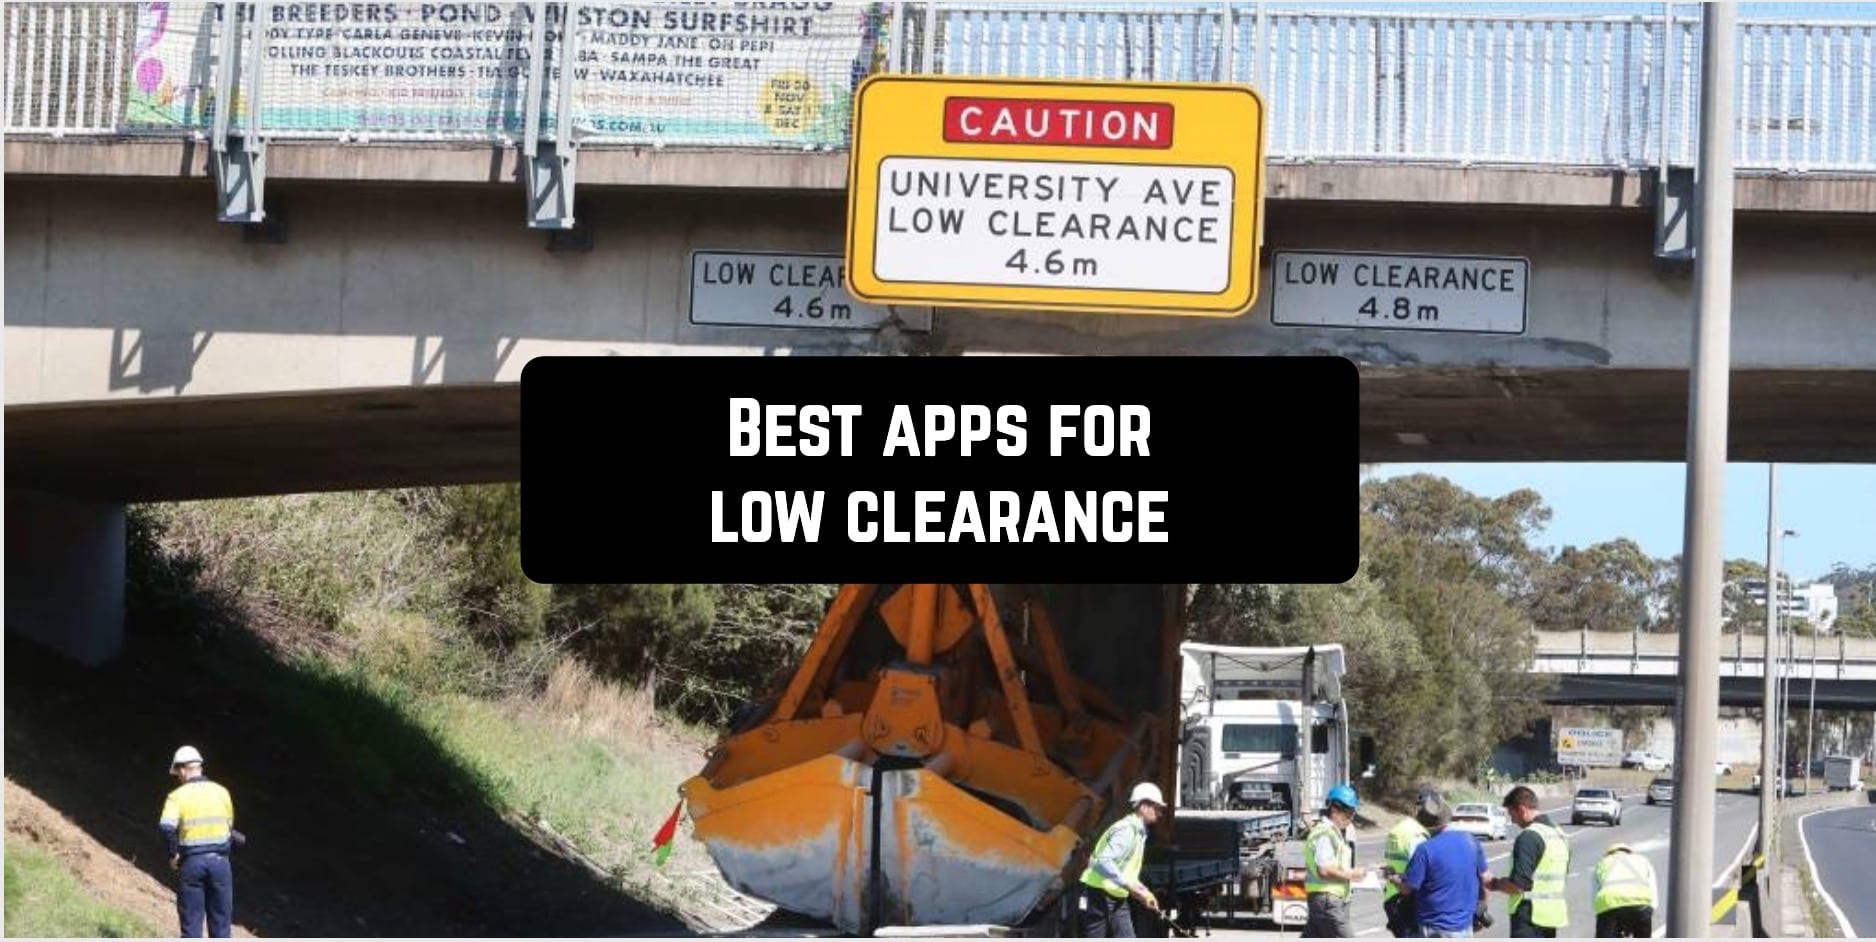 Best apps for low clearance